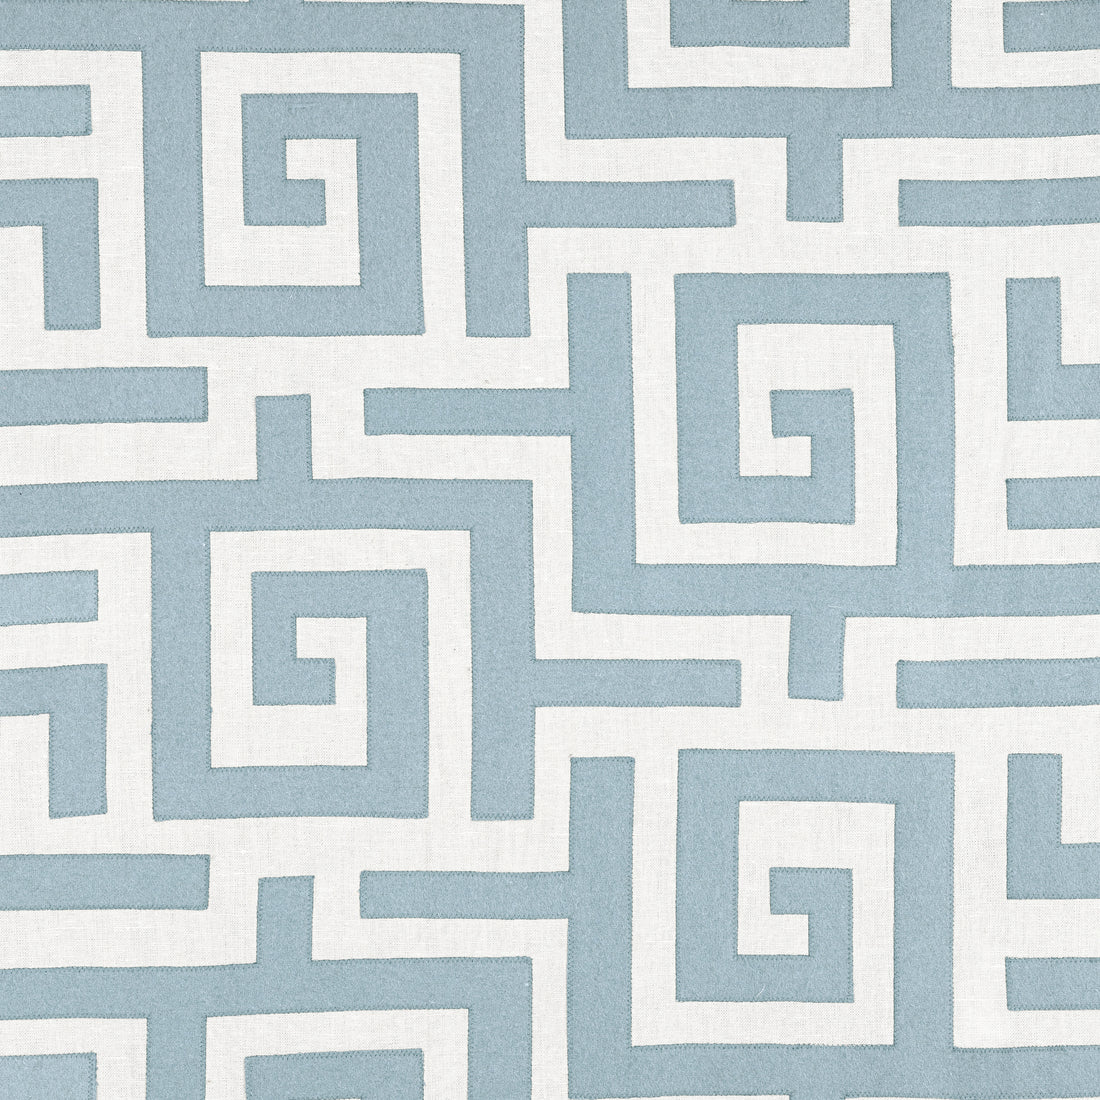 Tulum Applique fabric in spa blue color - pattern number W713222 - by Thibaut in the Mesa collection